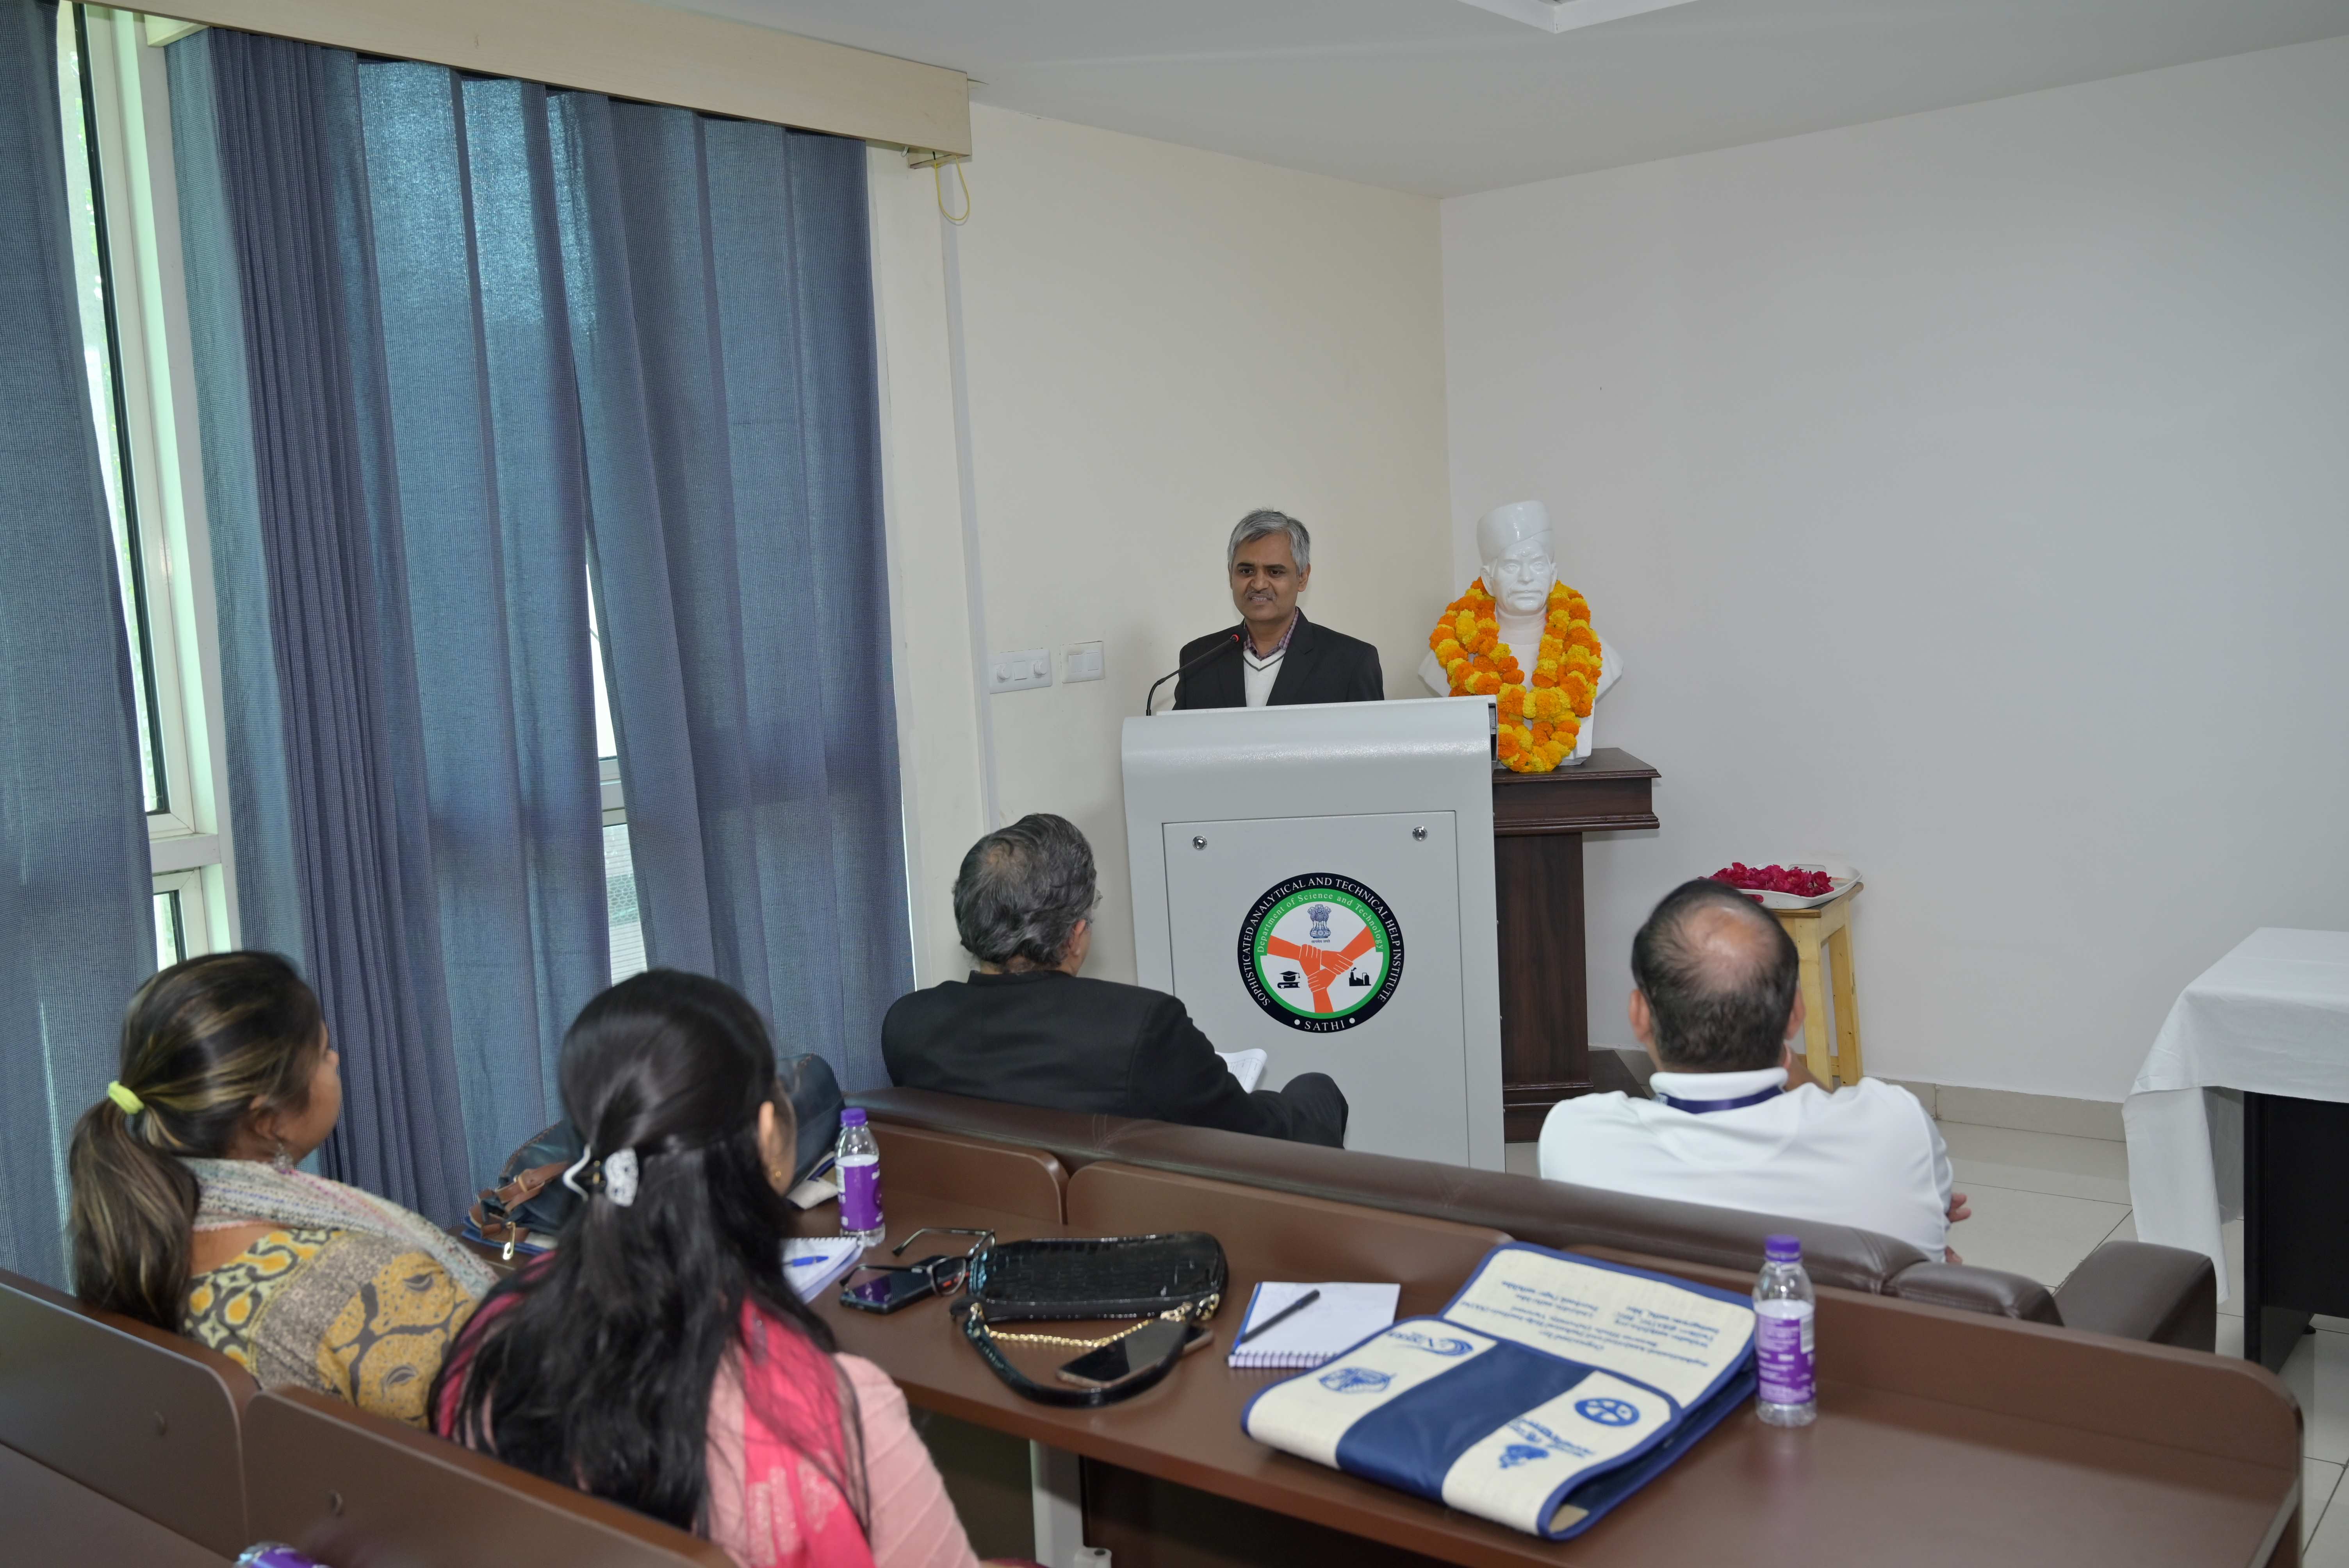 Chief Guest of Inaugural Ceremony - Mr. Abhay Thakur, Finance Officer, BHU